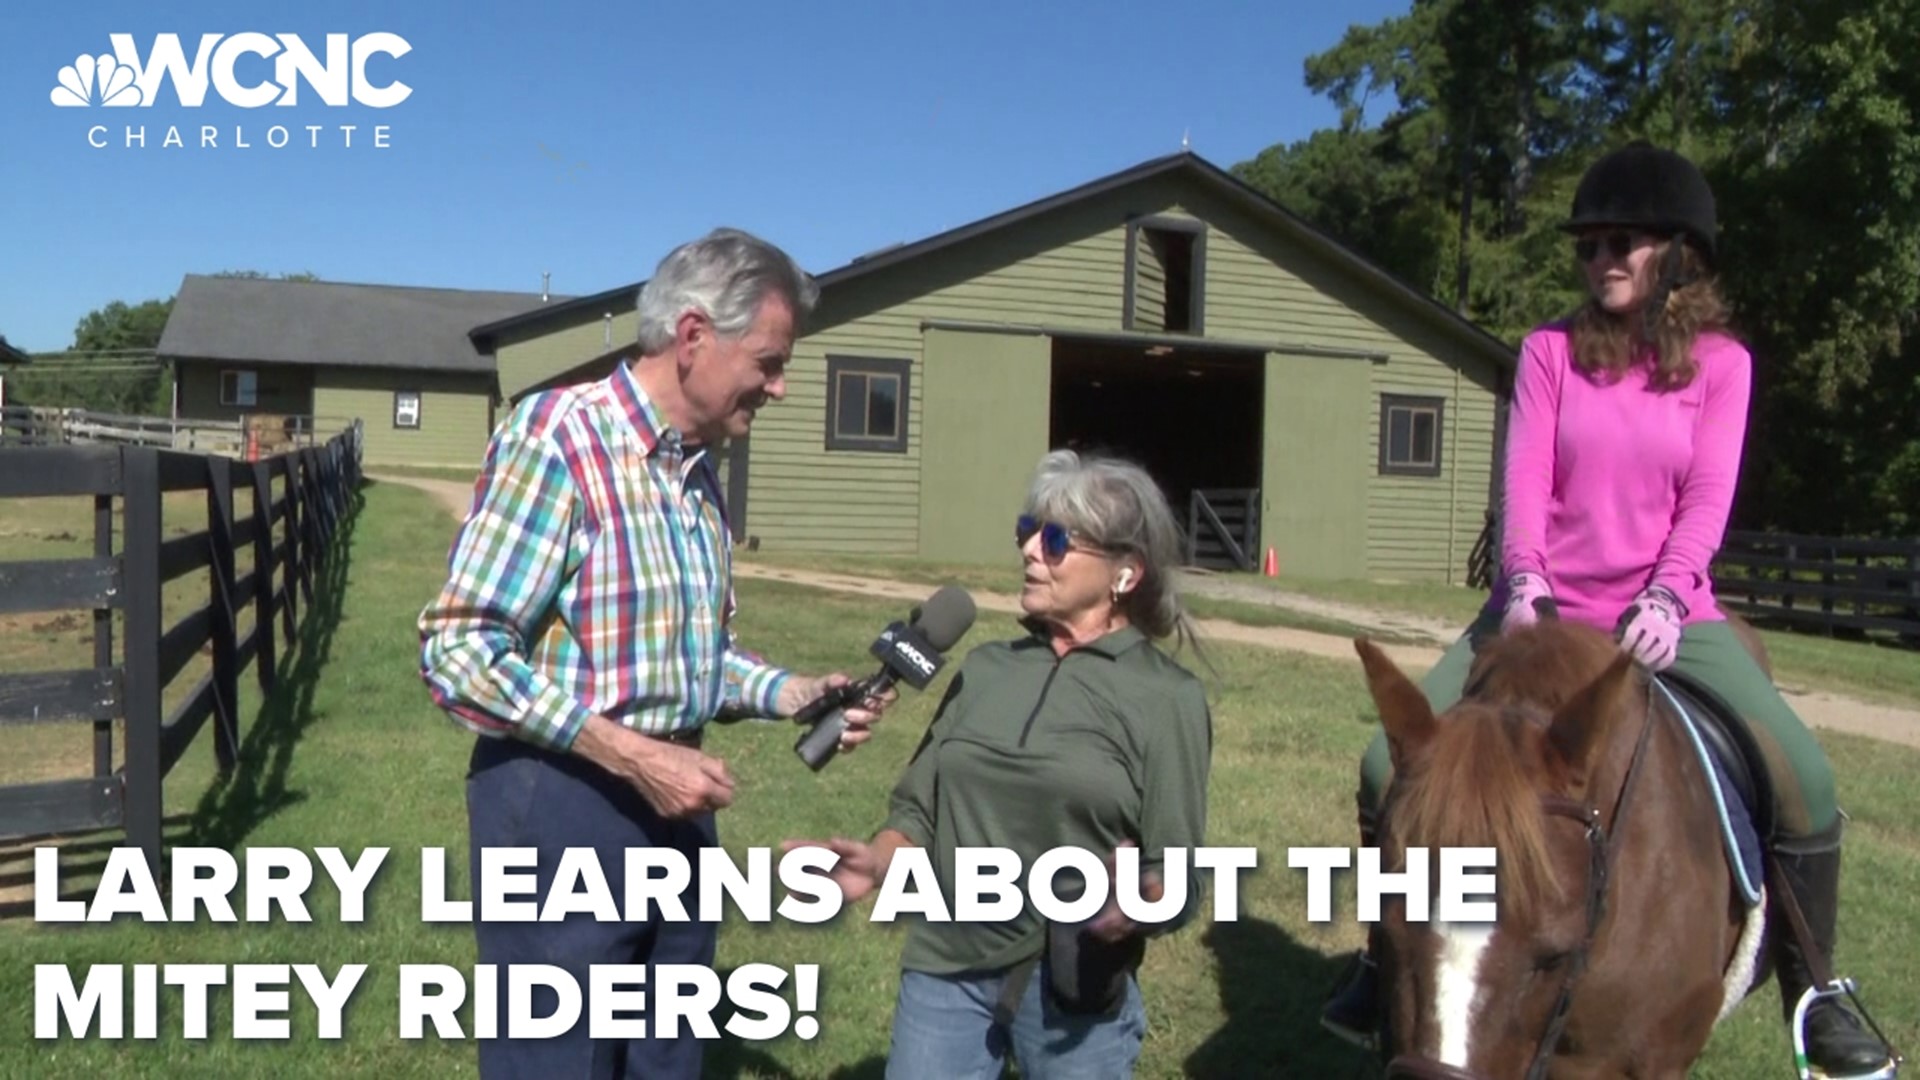 Larry Sprinkle spoke with the Mitey Riders director of operations to learn more about what makes the program unique.